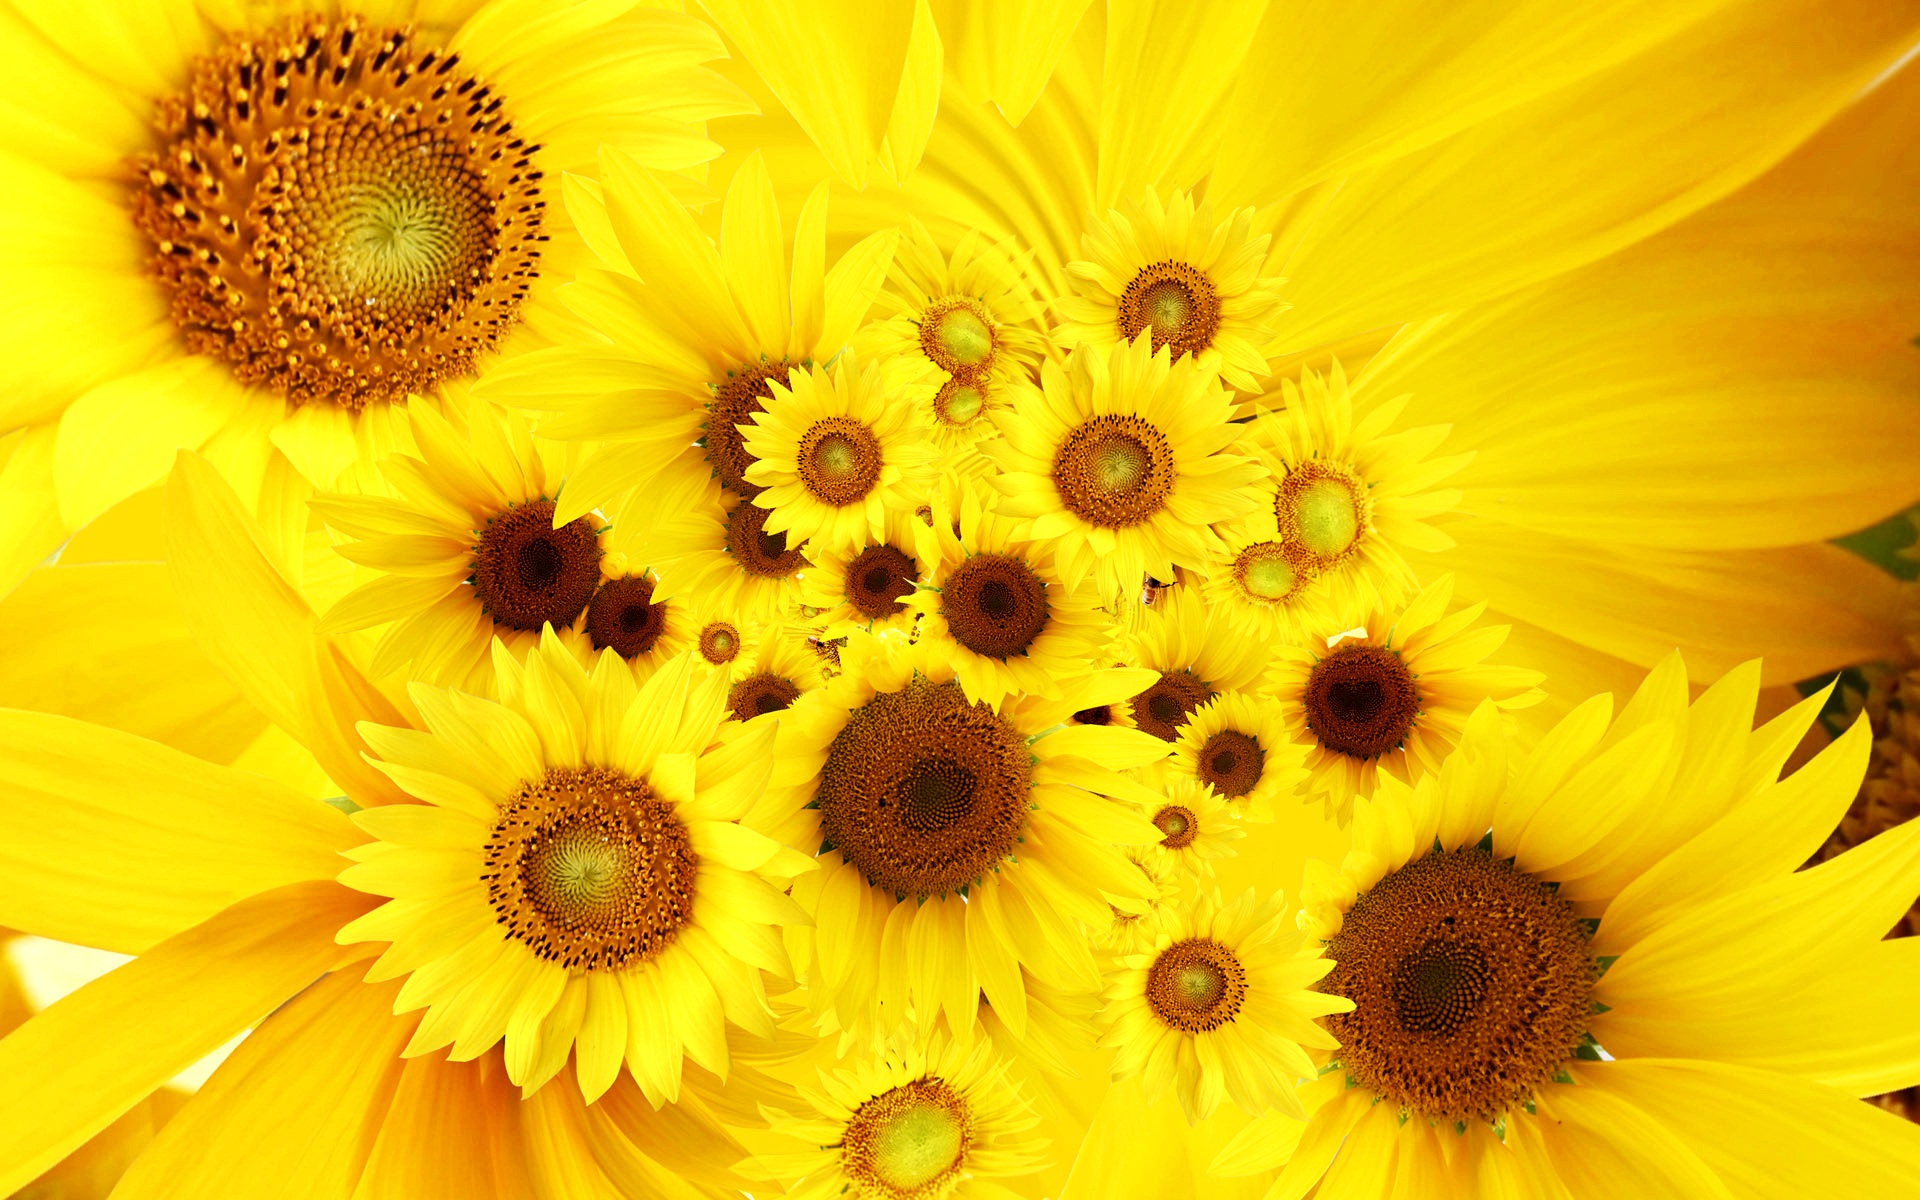 Cool Sunflowers Wallpapers | Wallpapers HD